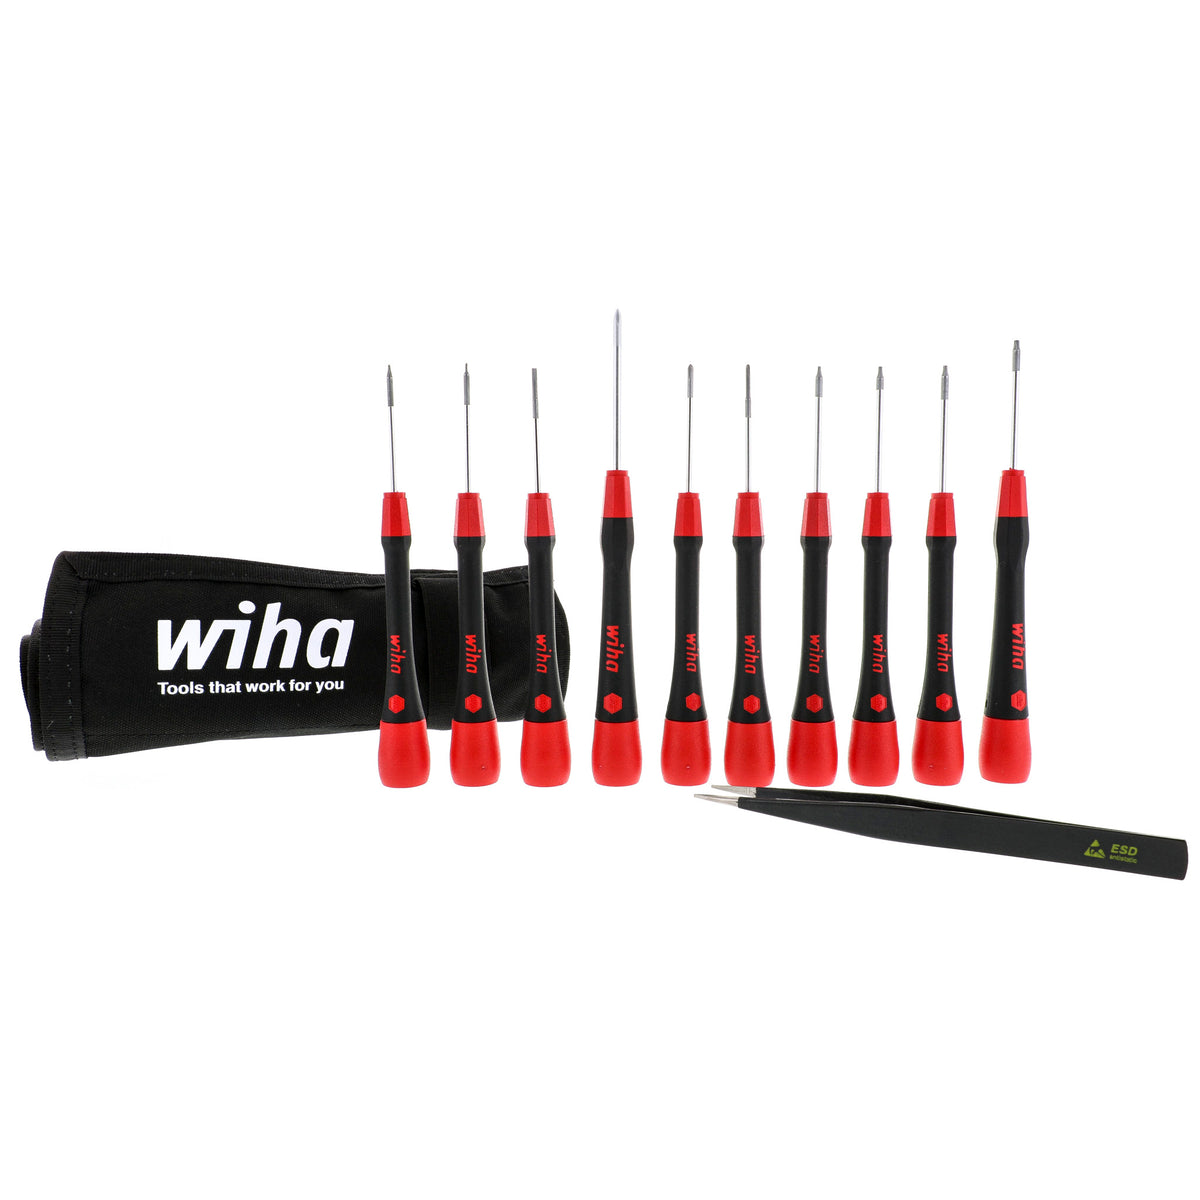 Wiha 26198 11 Piece PicoFinish Precision Screwdriver and Tweezers Smartphone Technician Set with Roll Pouch